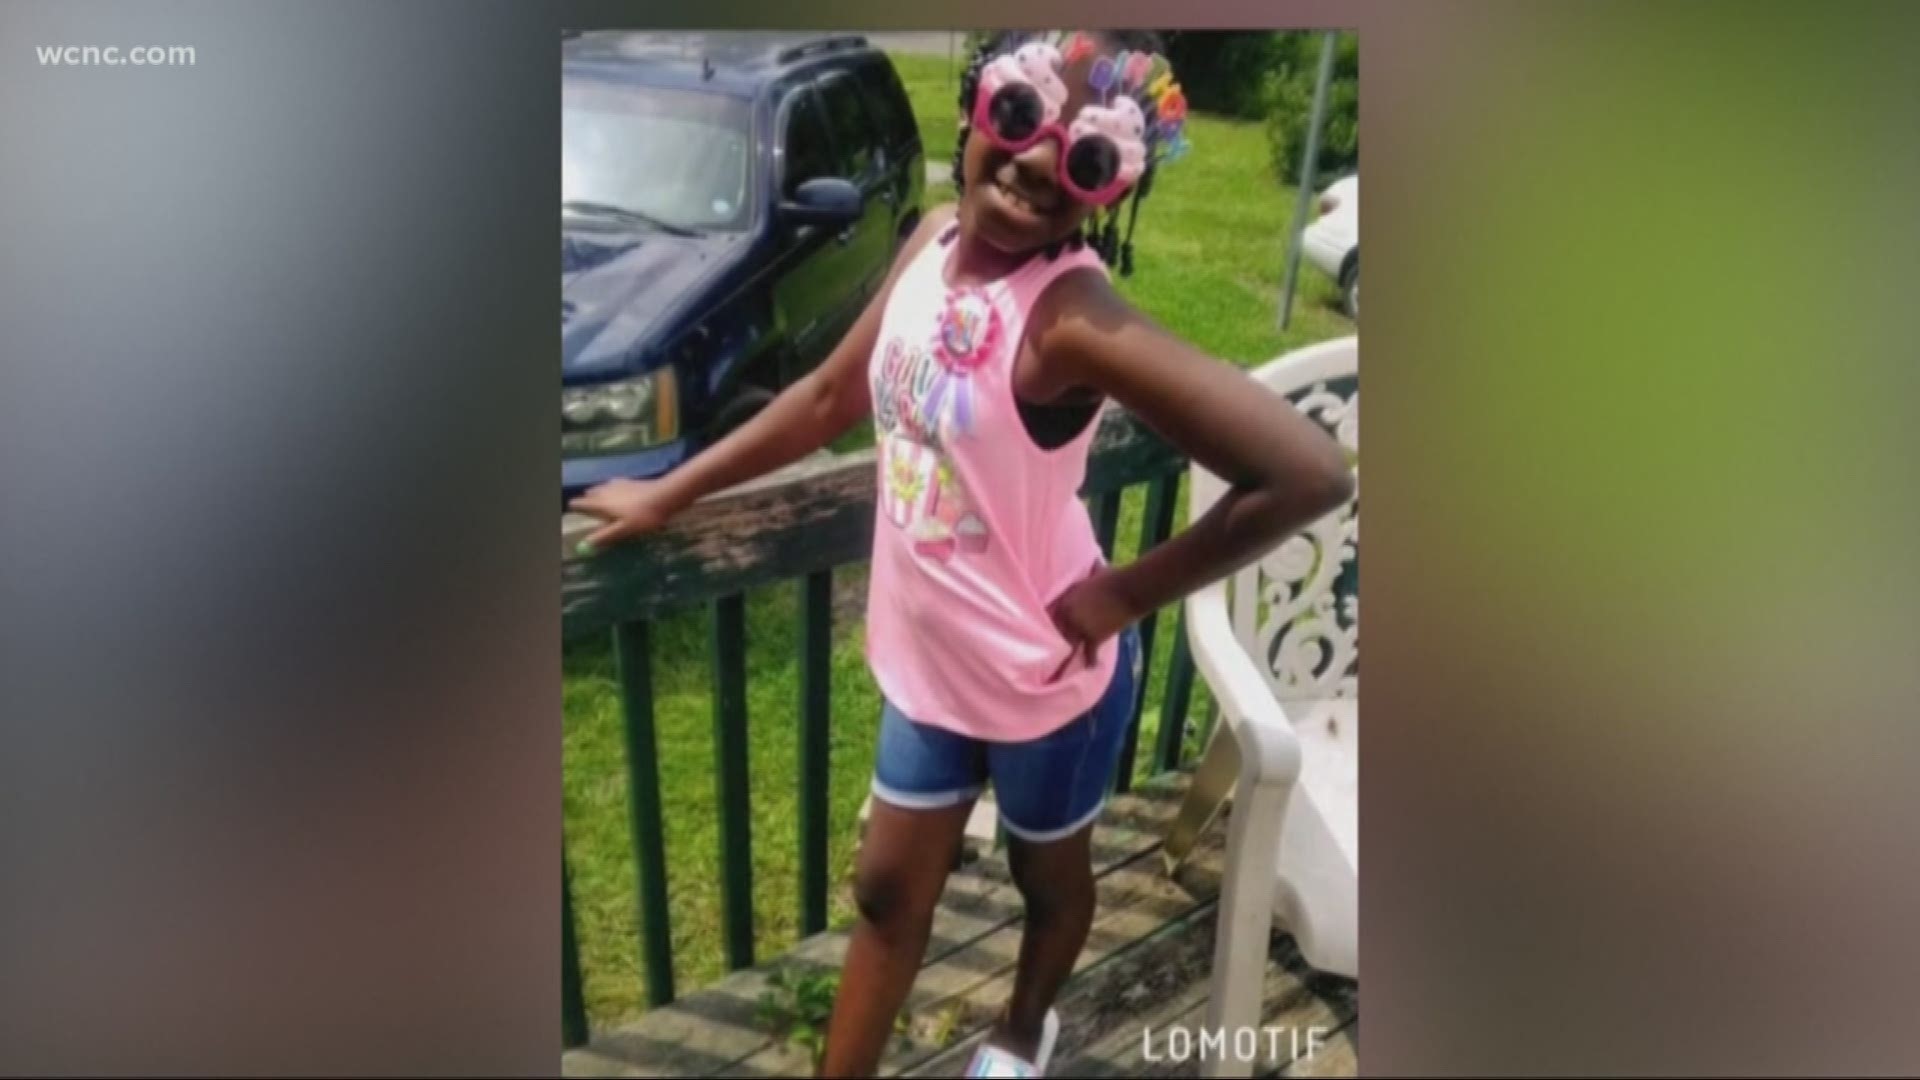 Officials in South Carolina are expected to address the death of Raniya Wright, a fifth-grader who died after a school fight in March.